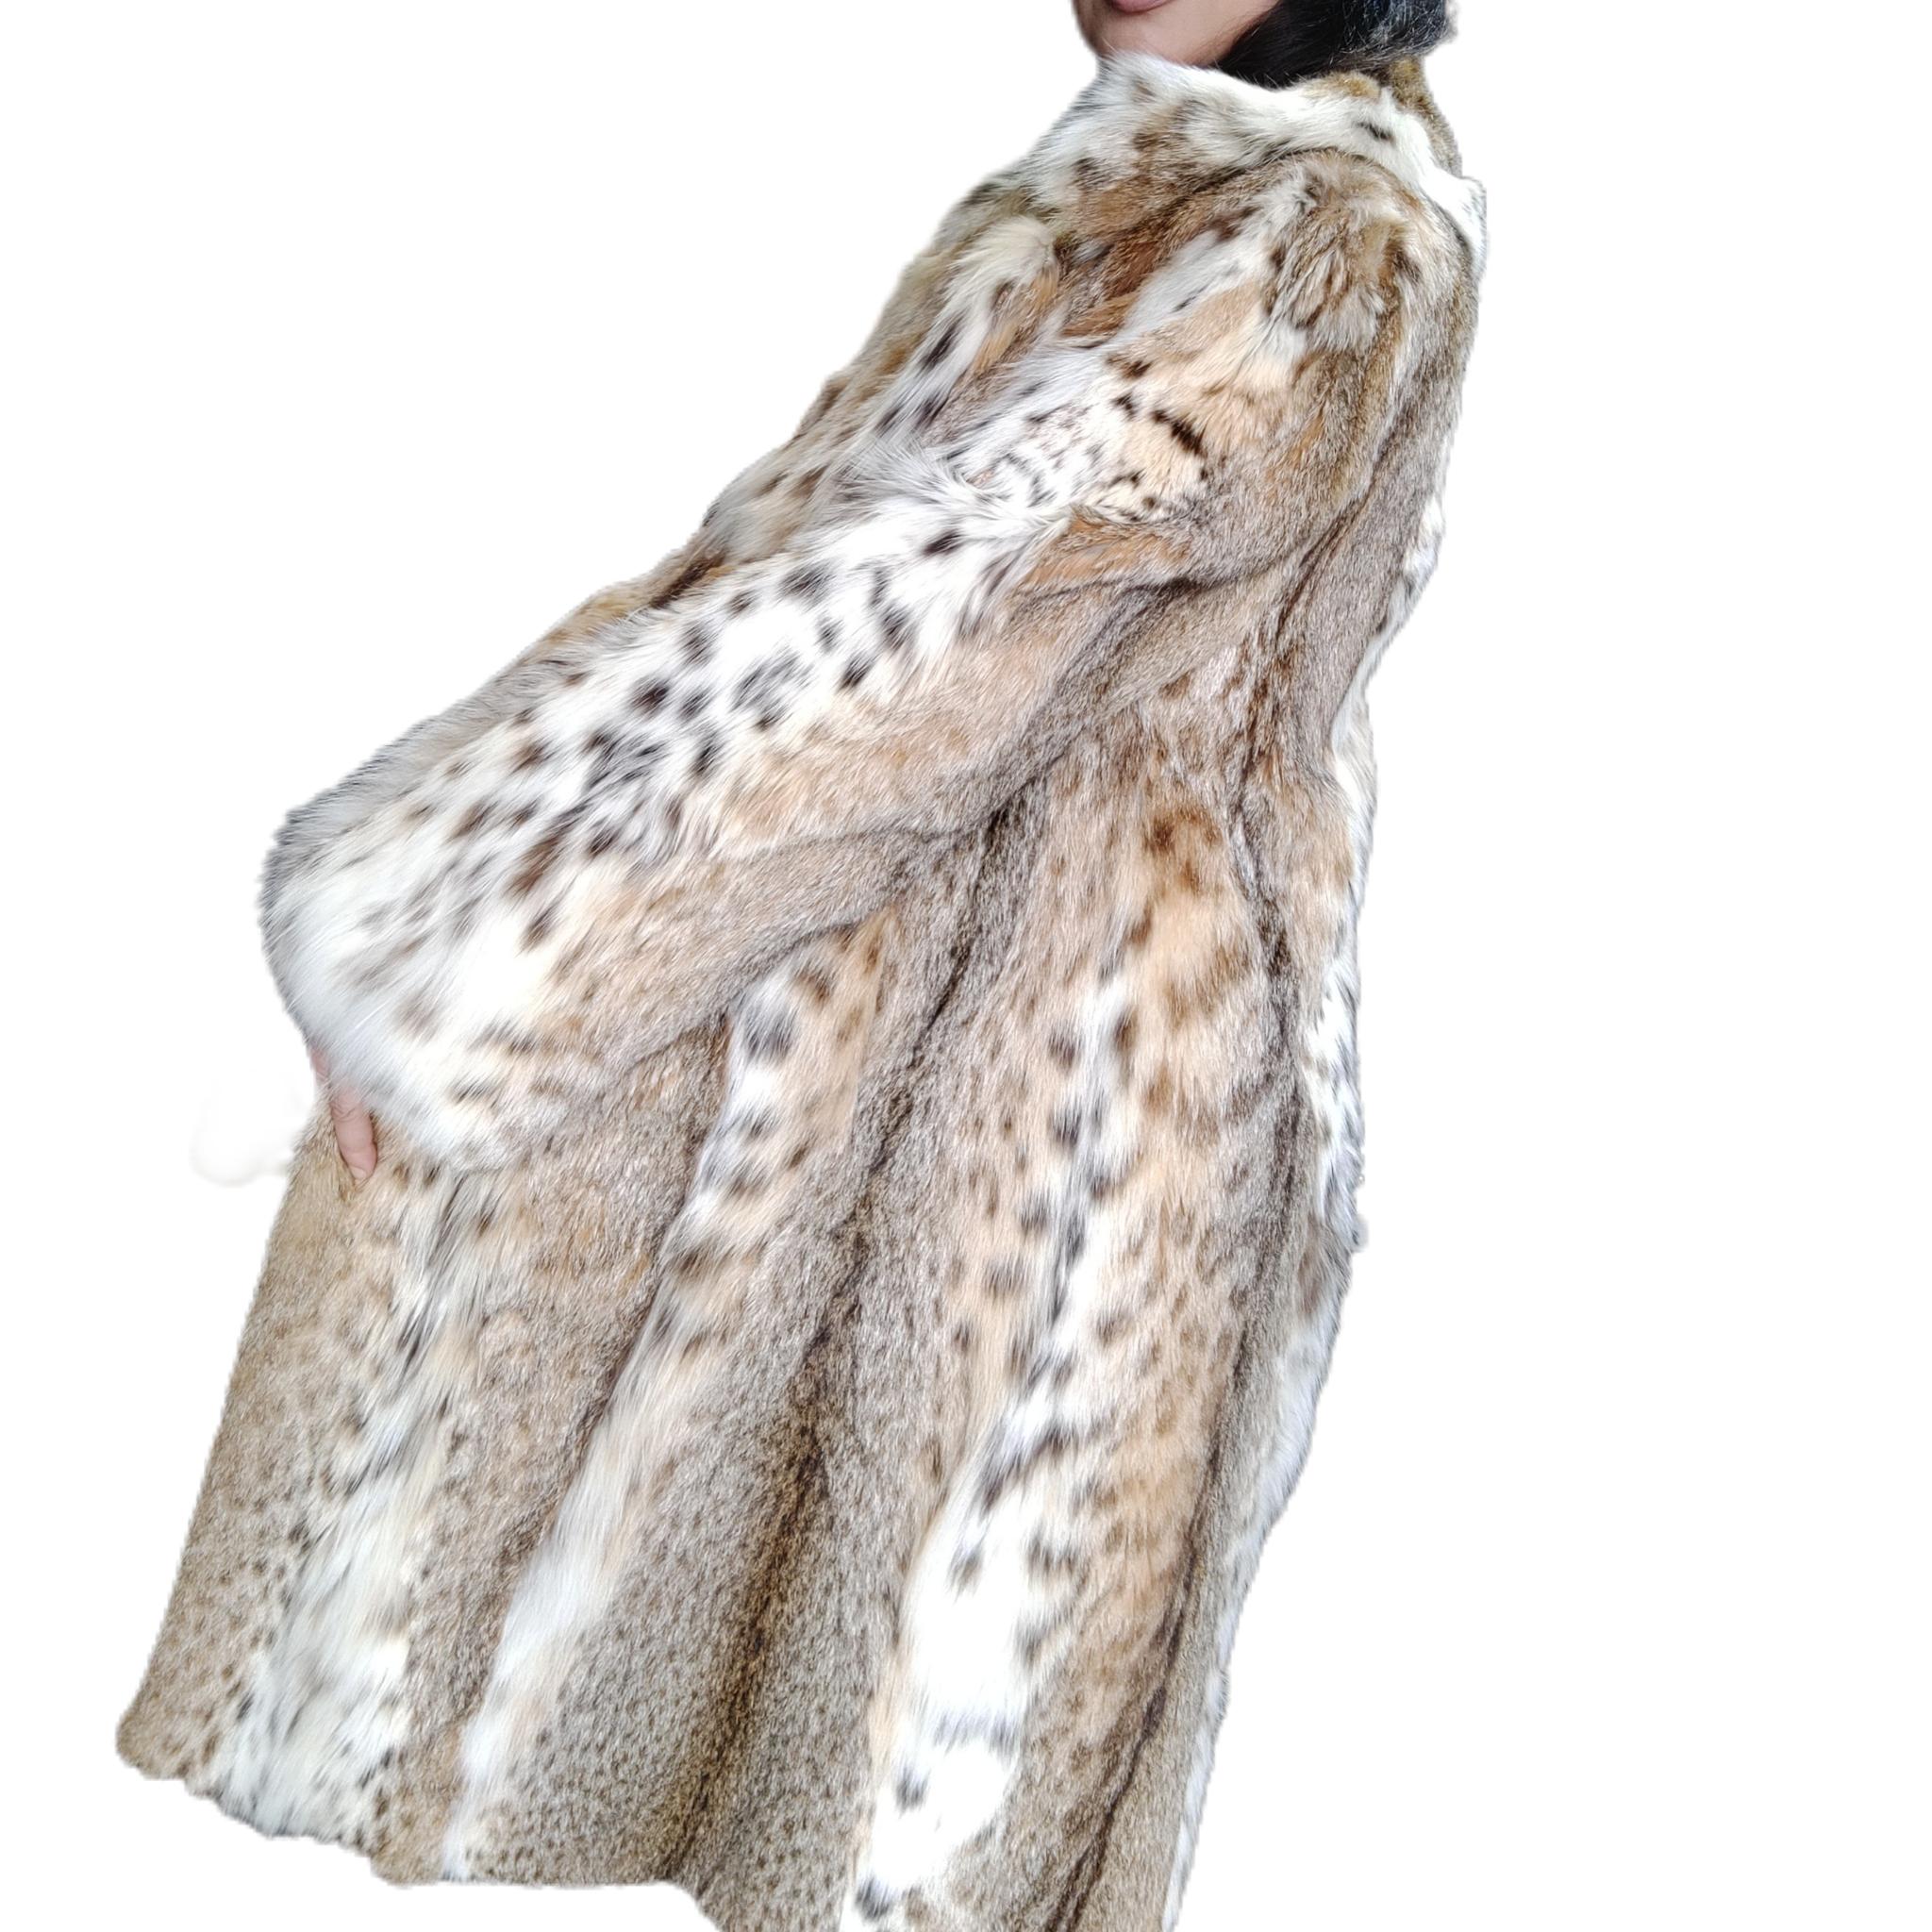 DESCRIPTION : BRAND NEW LYNX FUR COAT SIZE 4-6 

Portrait collar, straight sleeves, supple skins, beautiful fresh fur, european german clasps for closure, too slit pockets, nice big full pelts skins in excellent condition.

This item is made in